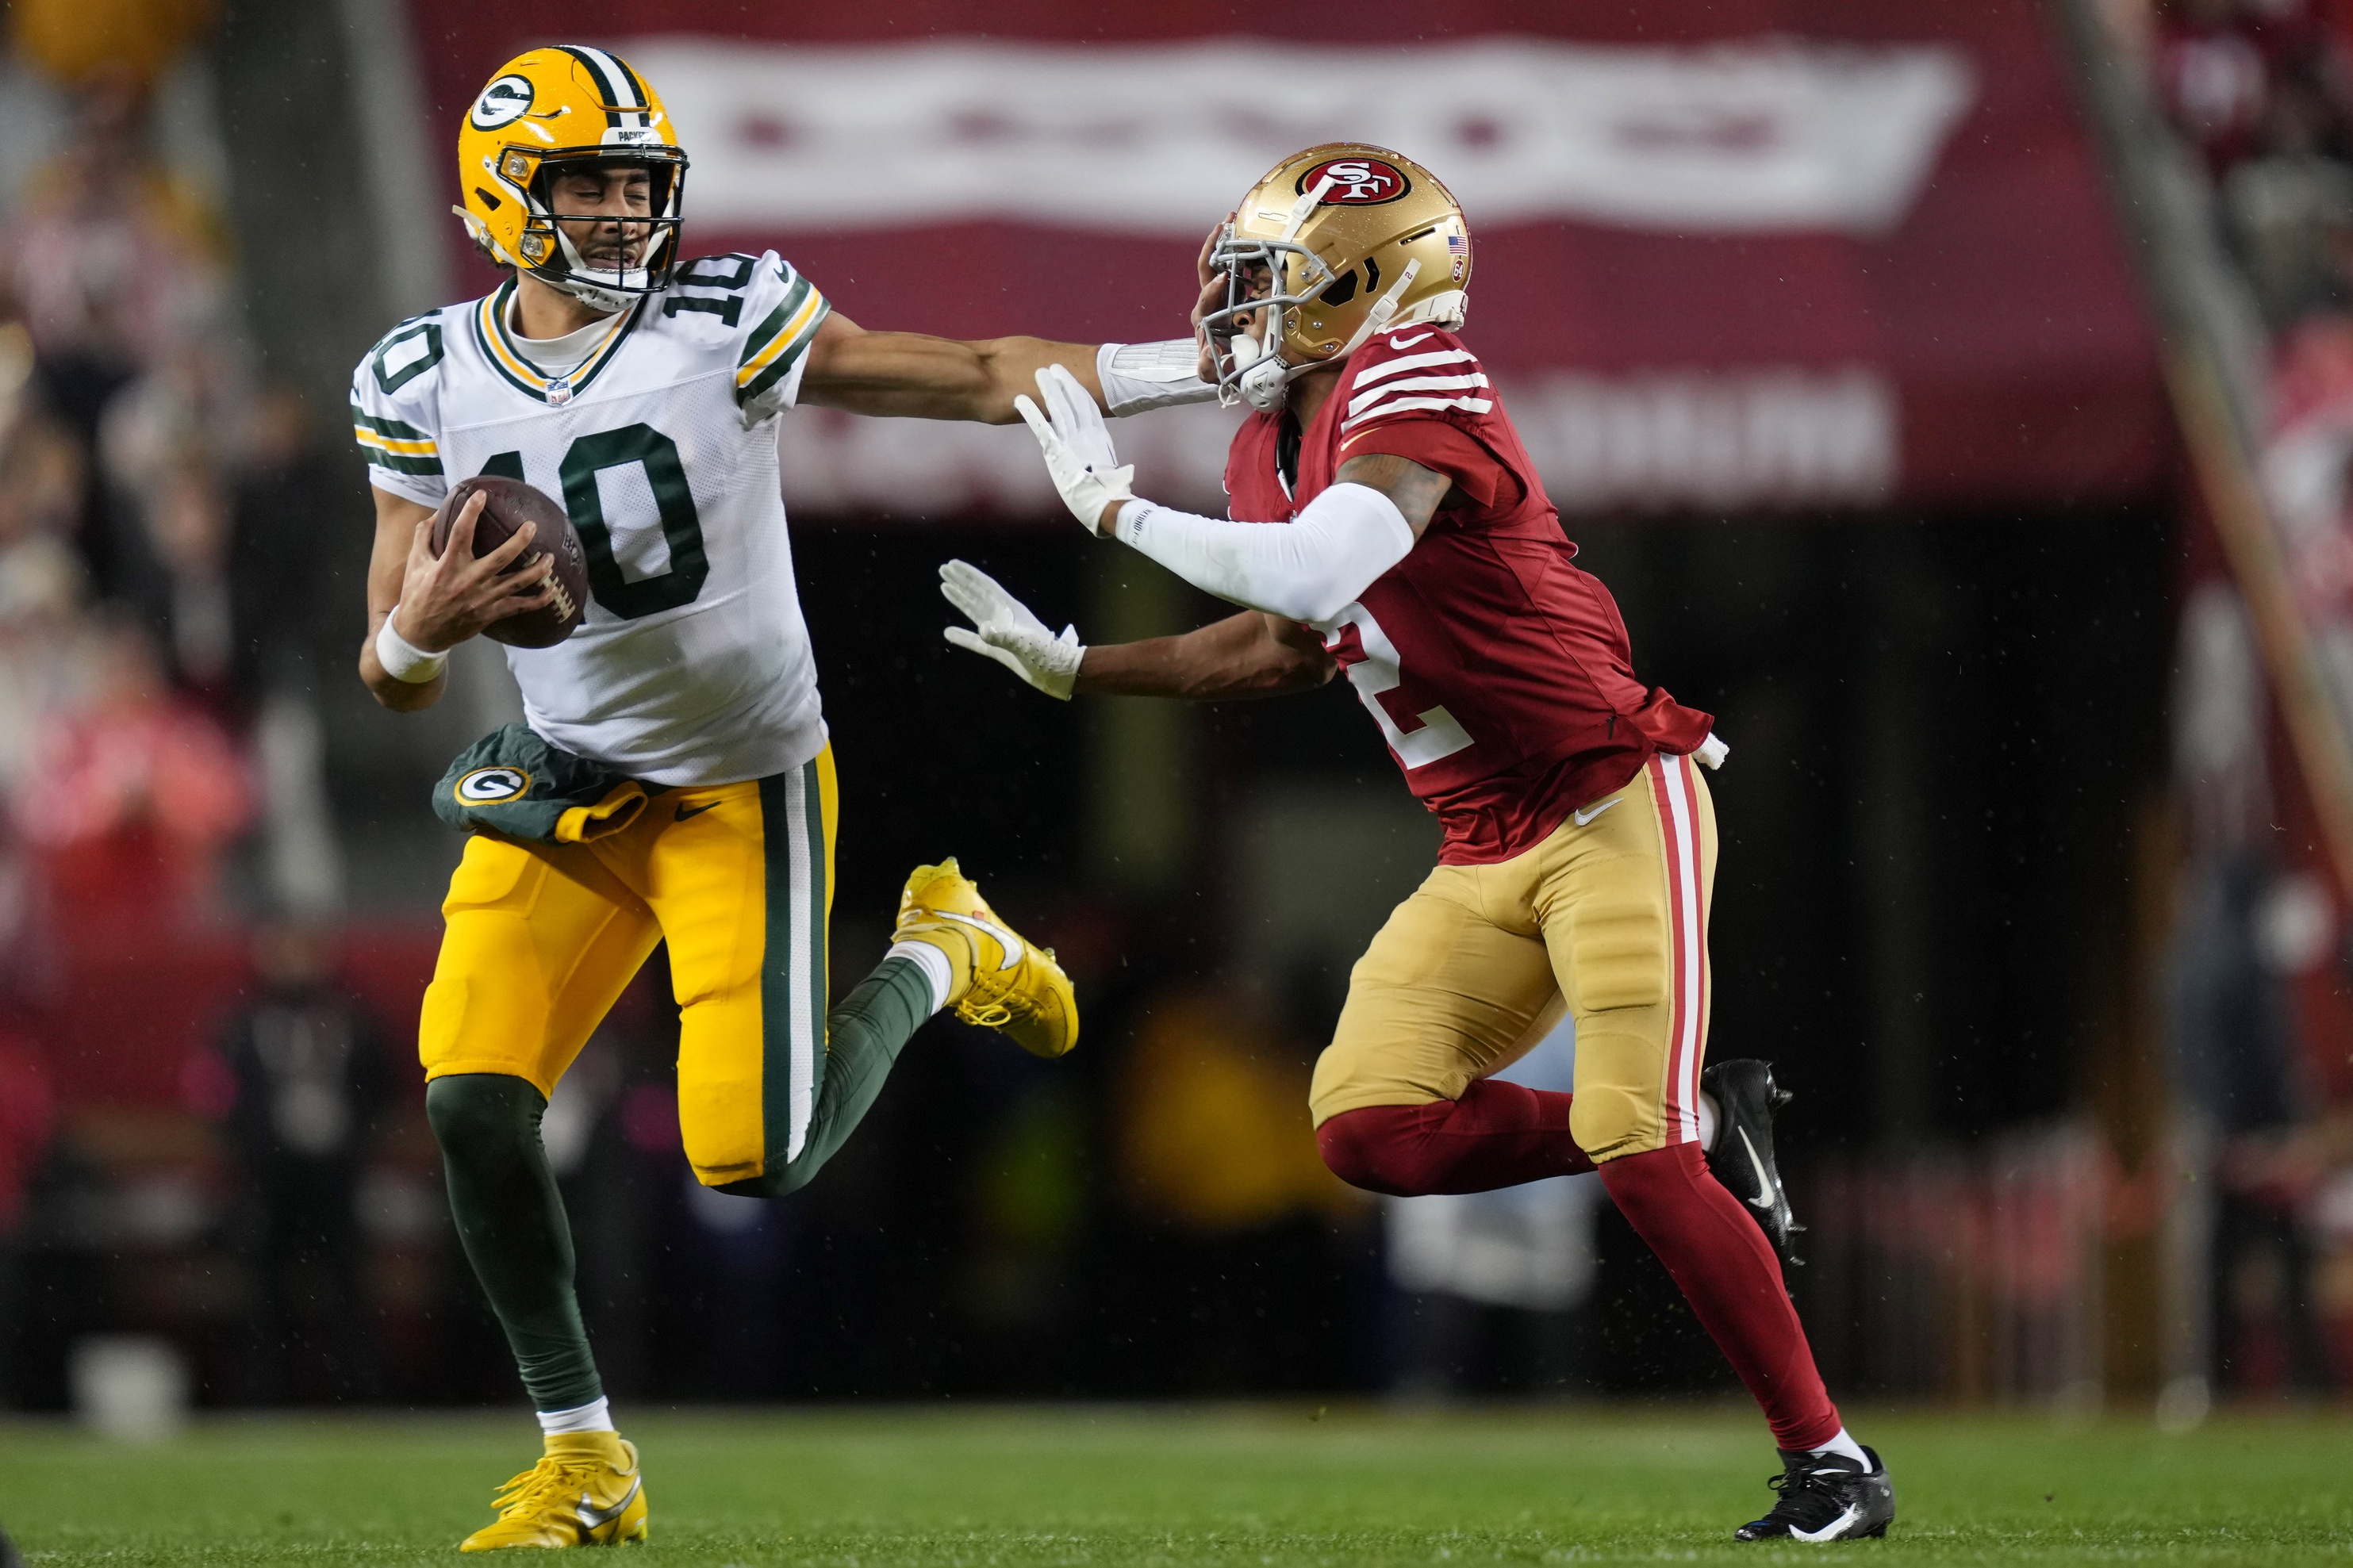 Packers quarterback Jordan Love threw an interception late in the fourth quarter as Green Bay lost a heartbreaker to the San Francisco 49ers in an NFC divisional round game Saturday.